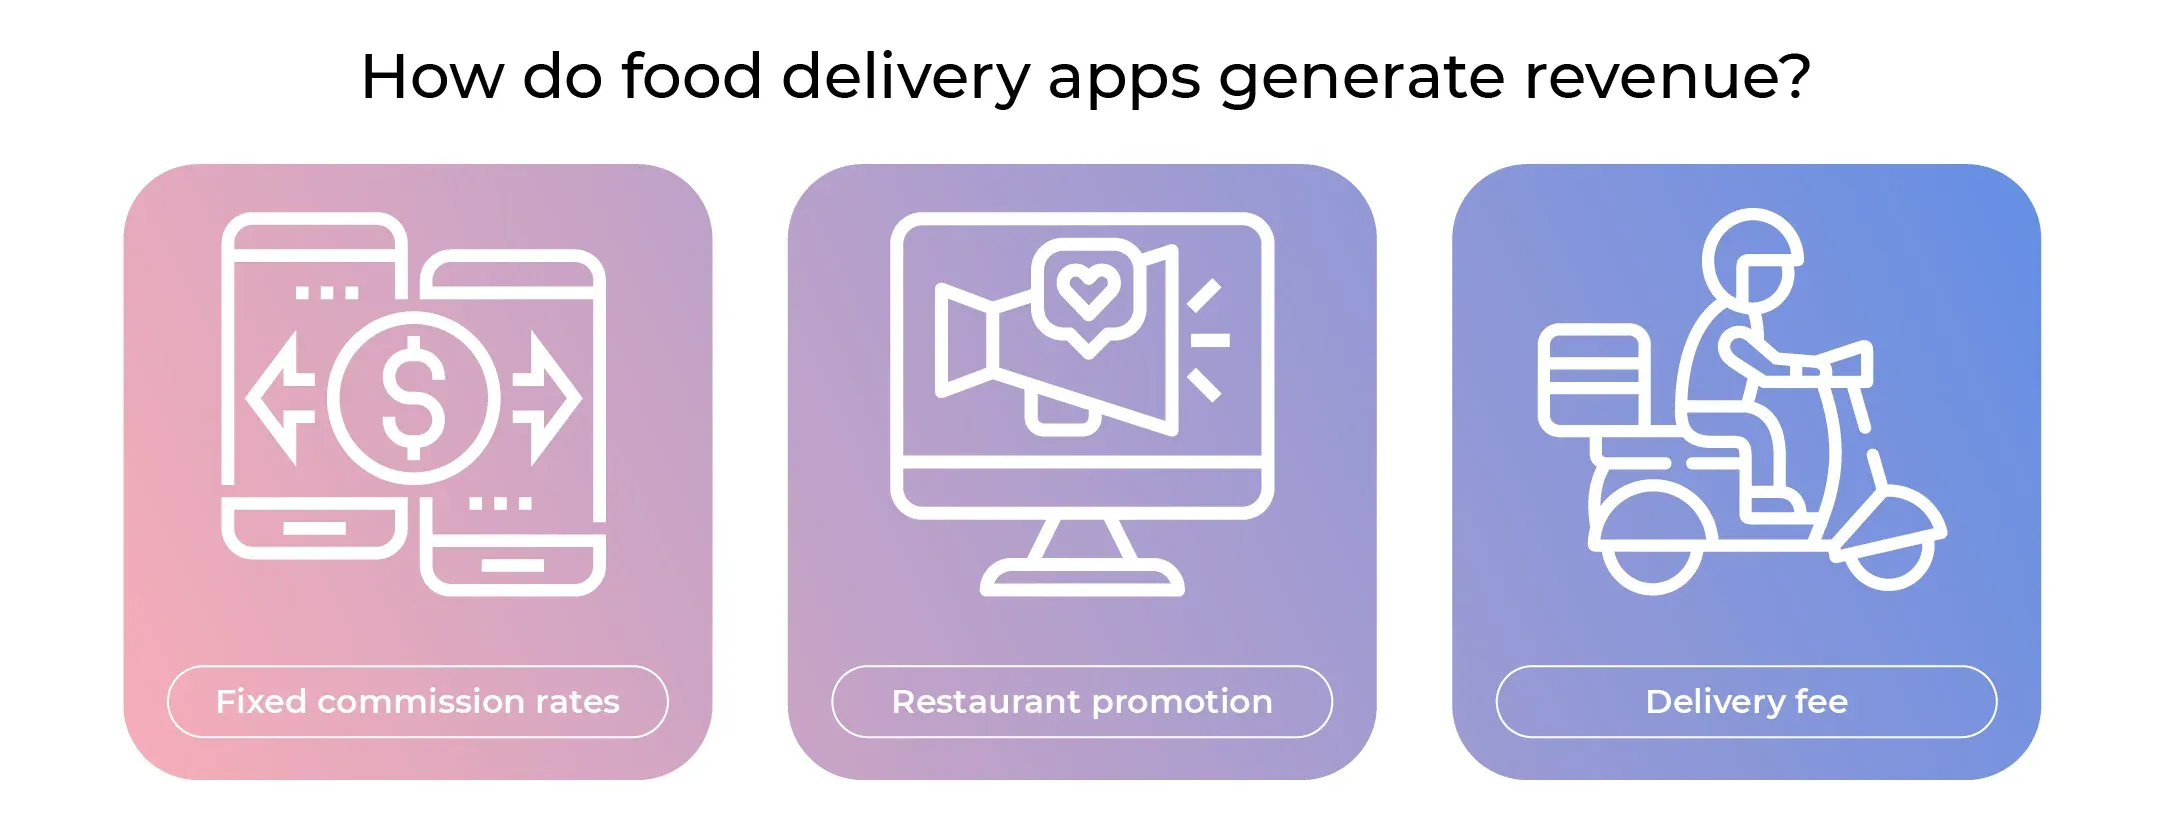 How do Food Delivery Apps generate revenue?